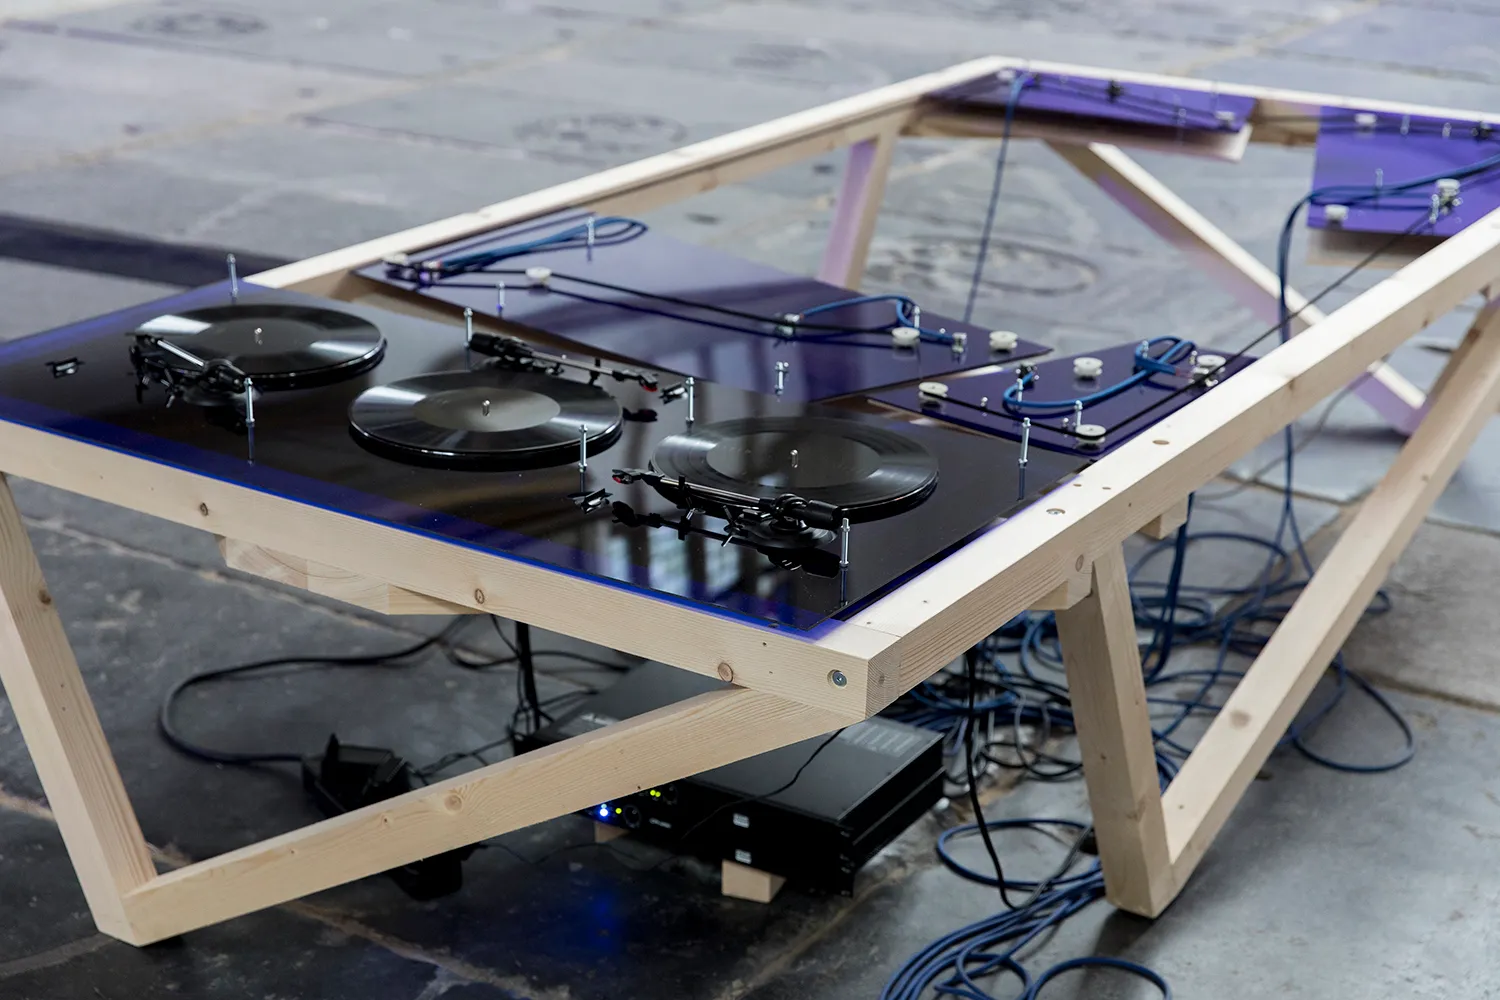 3 LP’s playing on a custom-made player, made of dark blue plexiglass, wood and a network of cables